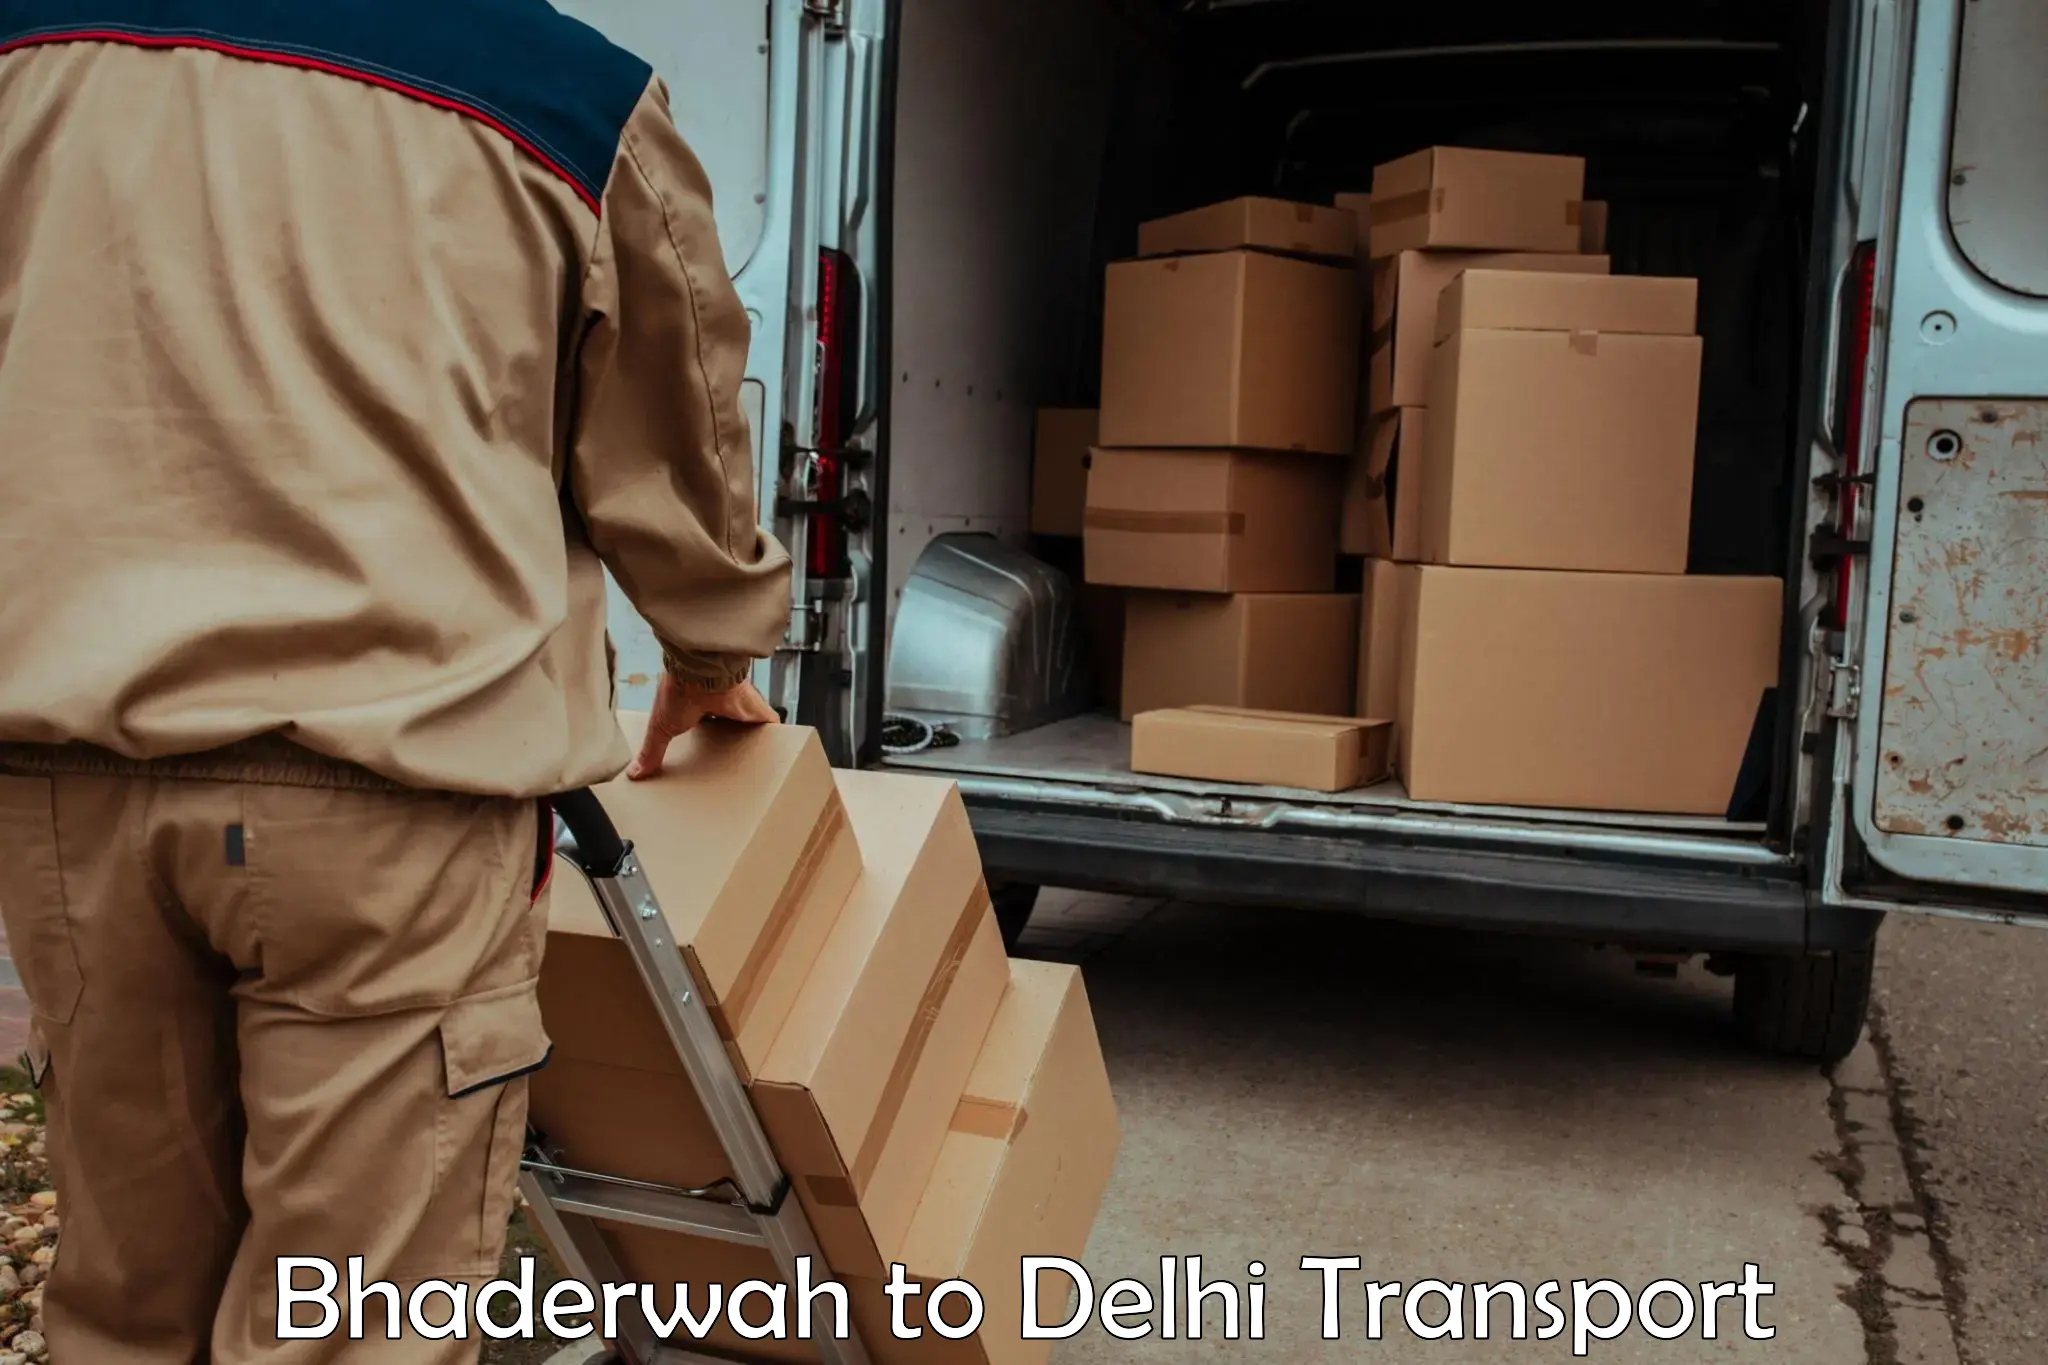 Lorry transport service Bhaderwah to NCR